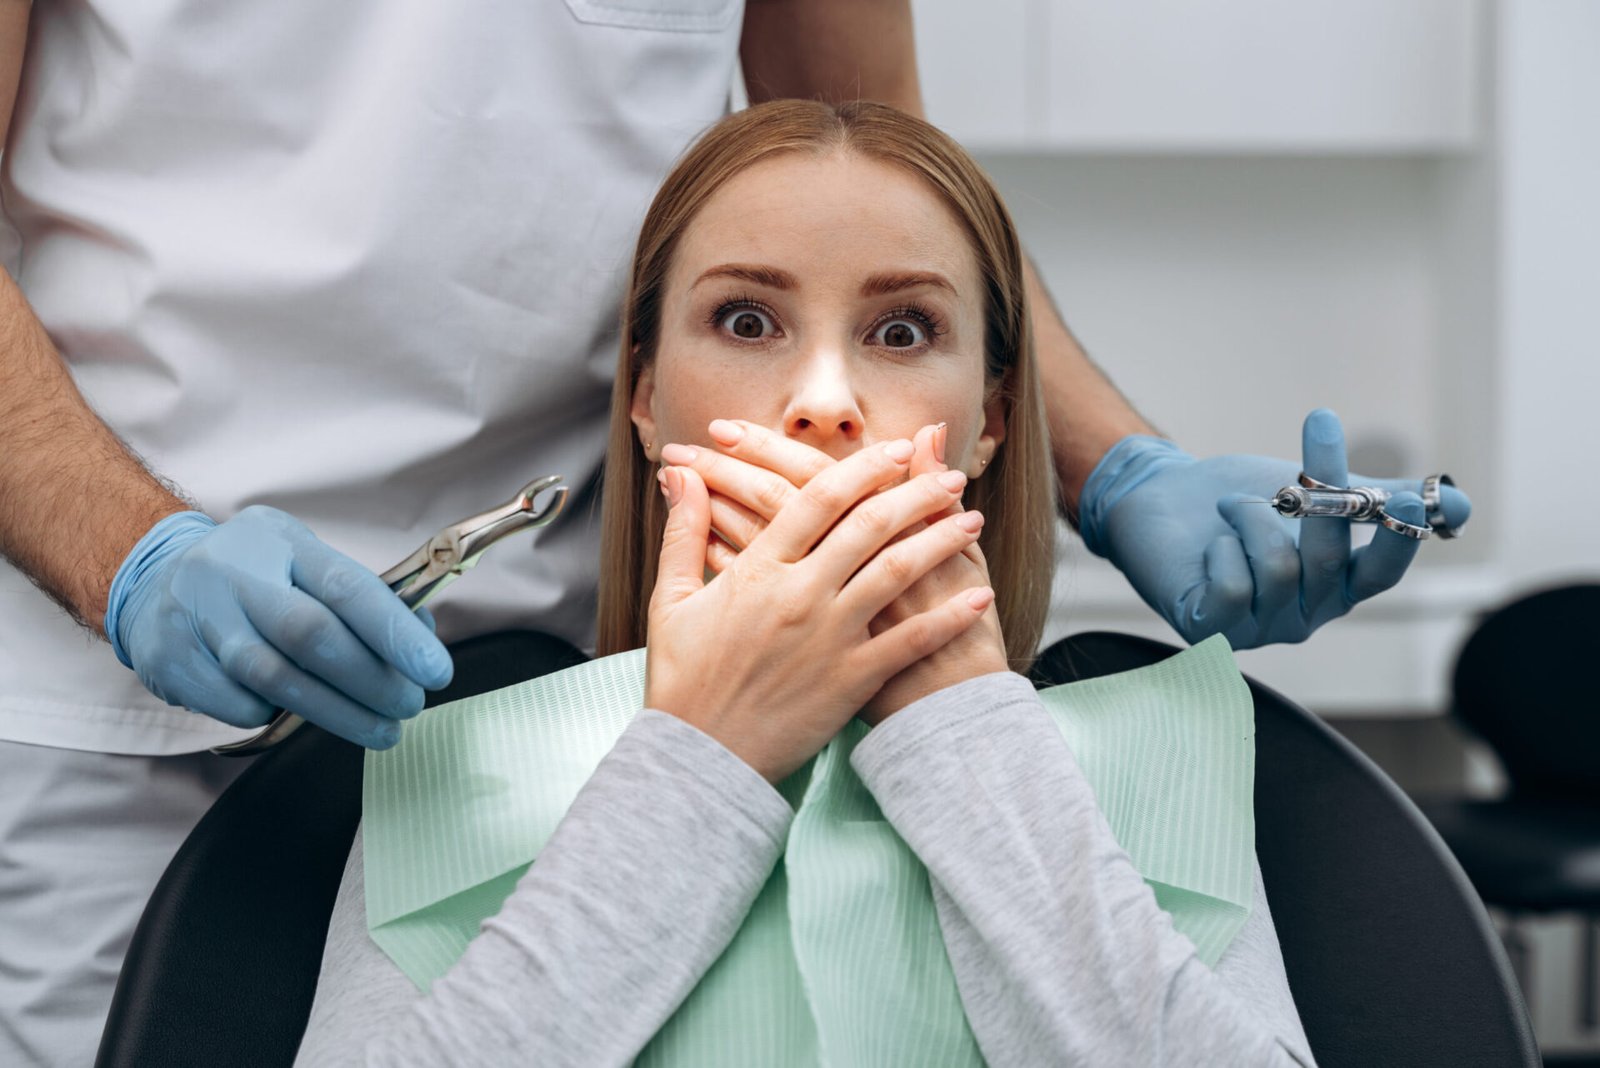 Image of a lady who looks scared covering her mouth with both hands at the clinic while a dental practitioner is behind her